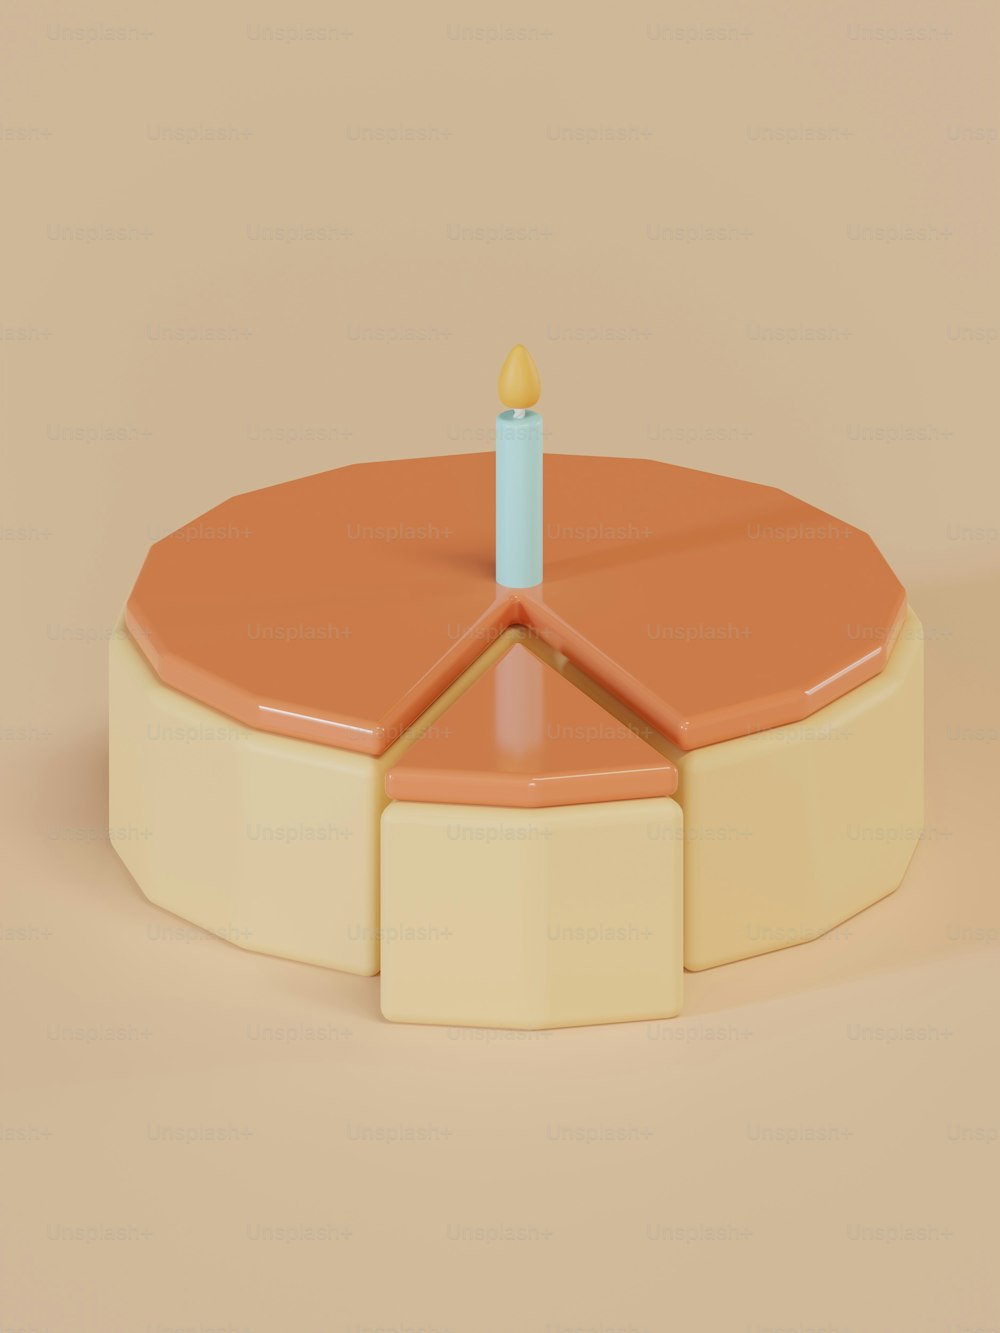 a round object with a candle on top of it